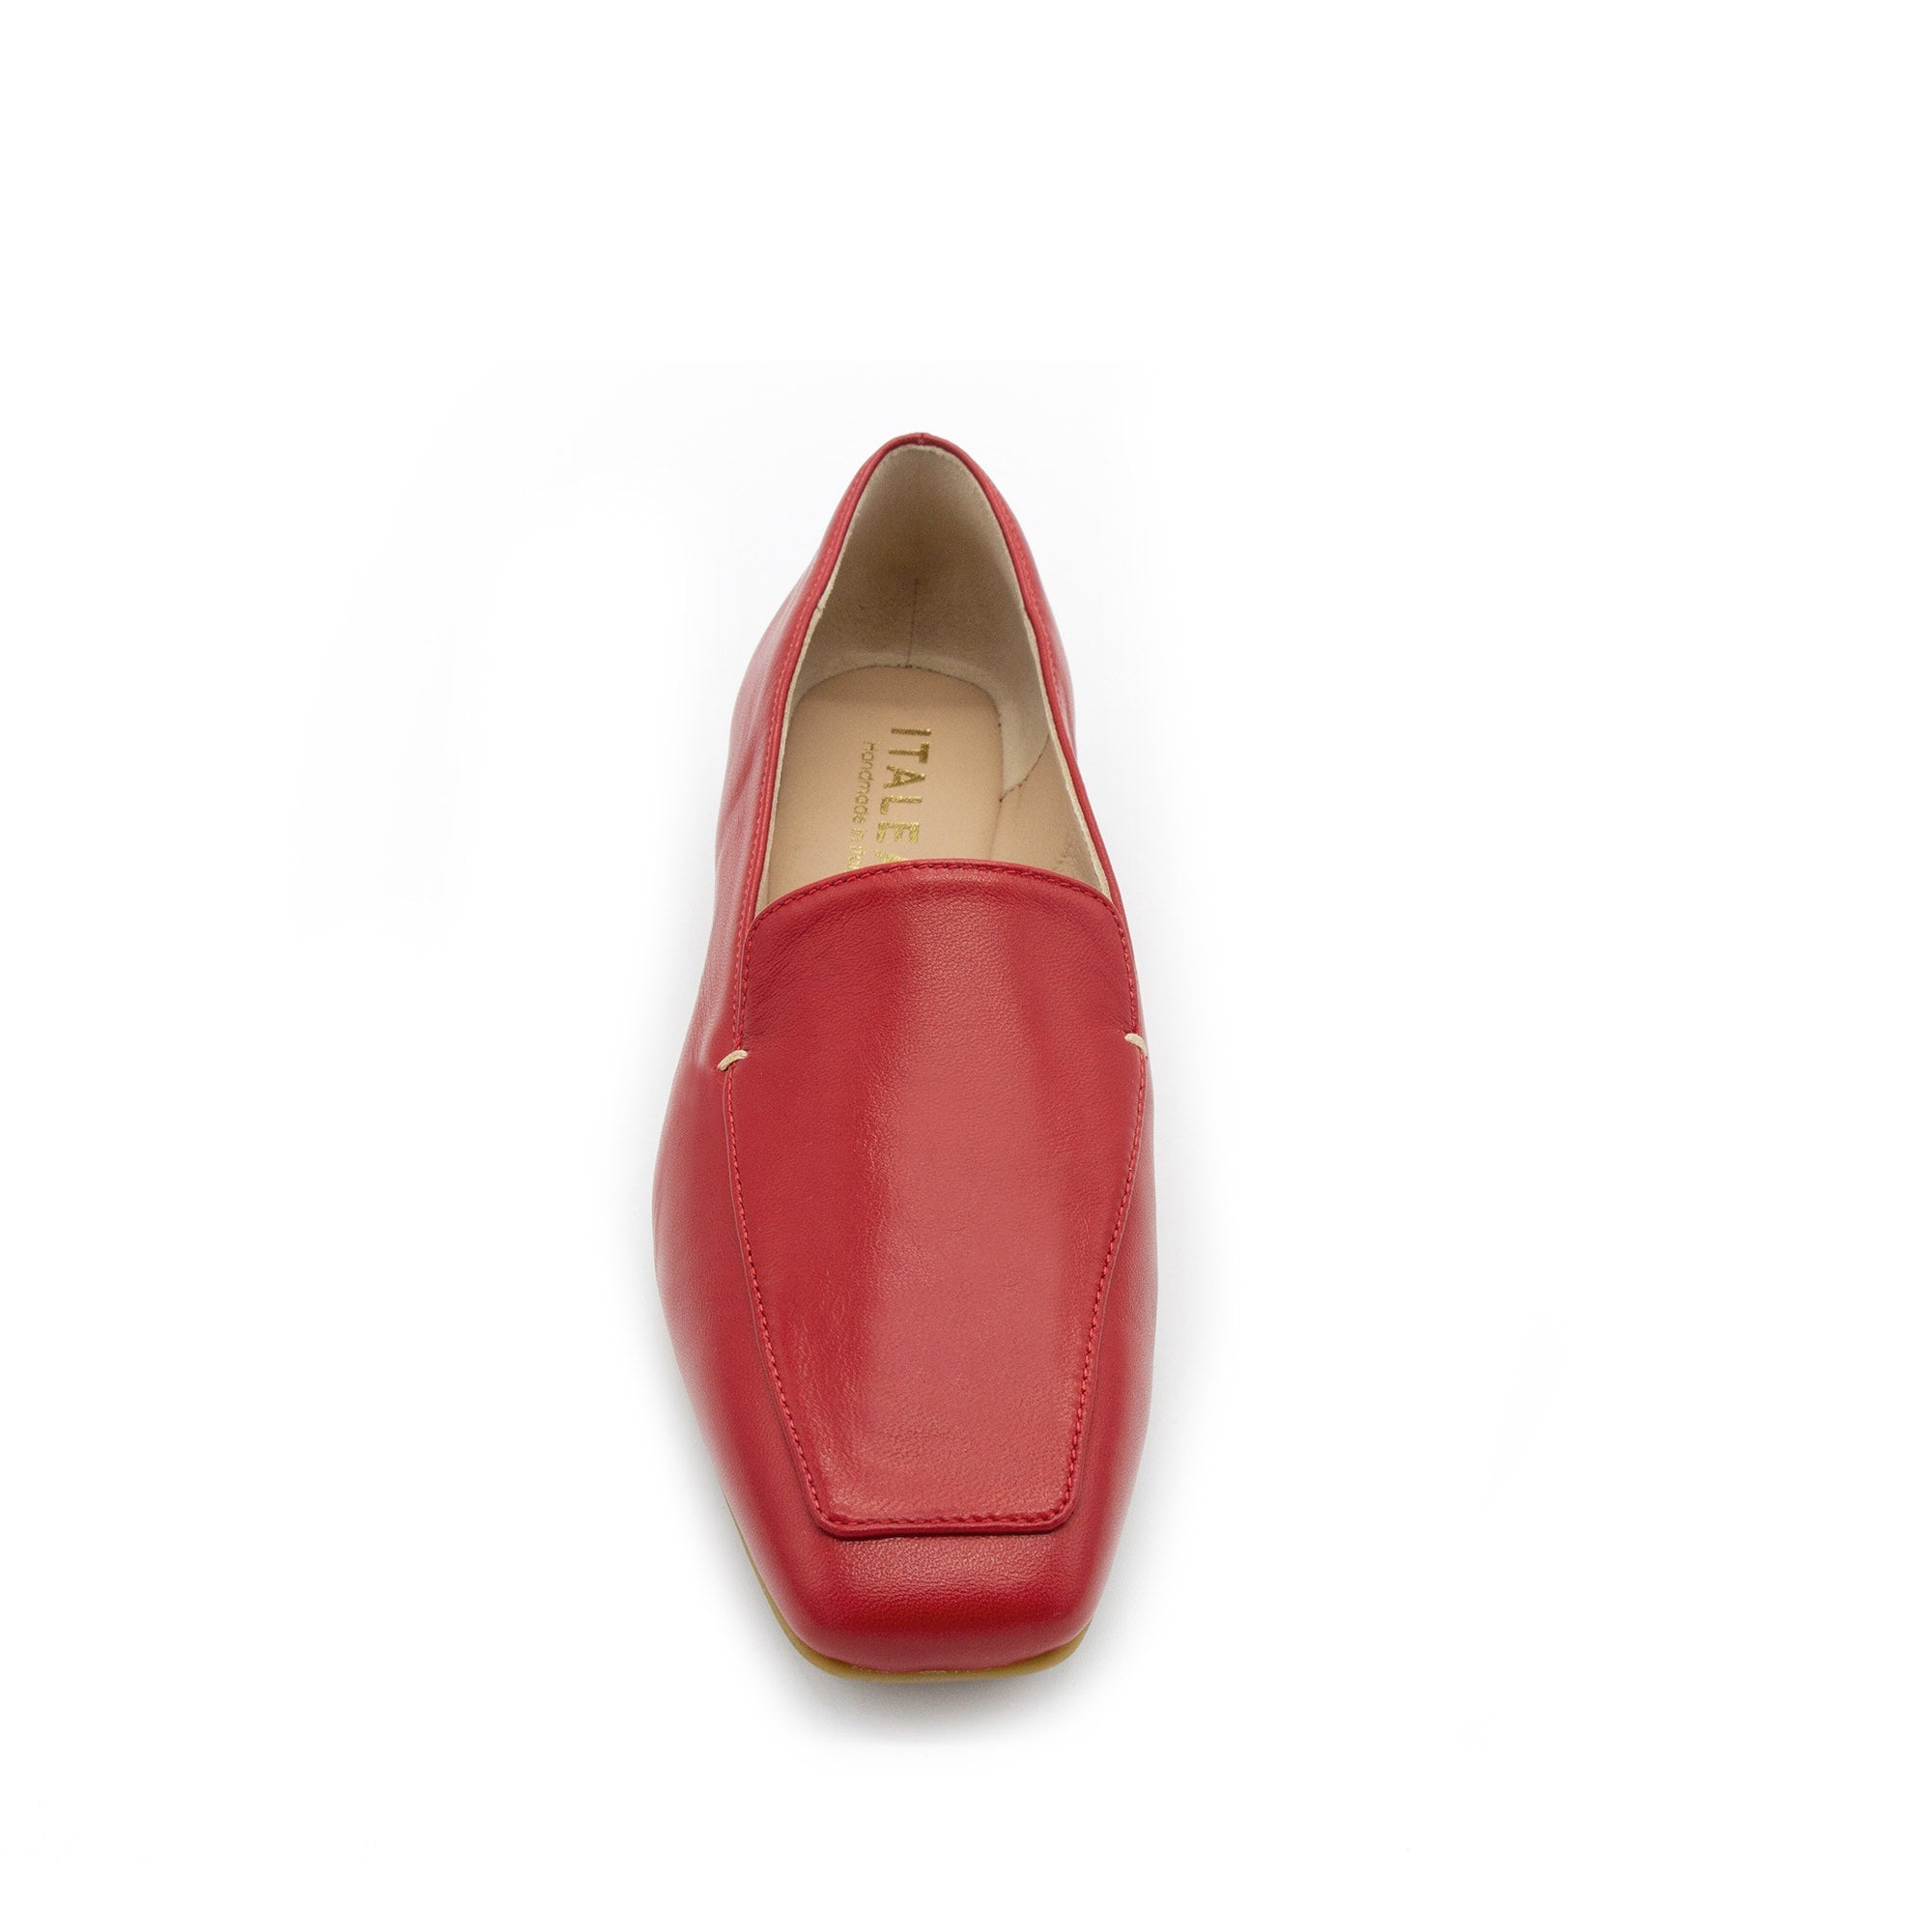 Christina Loafers | Women’s Italian Square Toe Loafers in 'Sunset ...